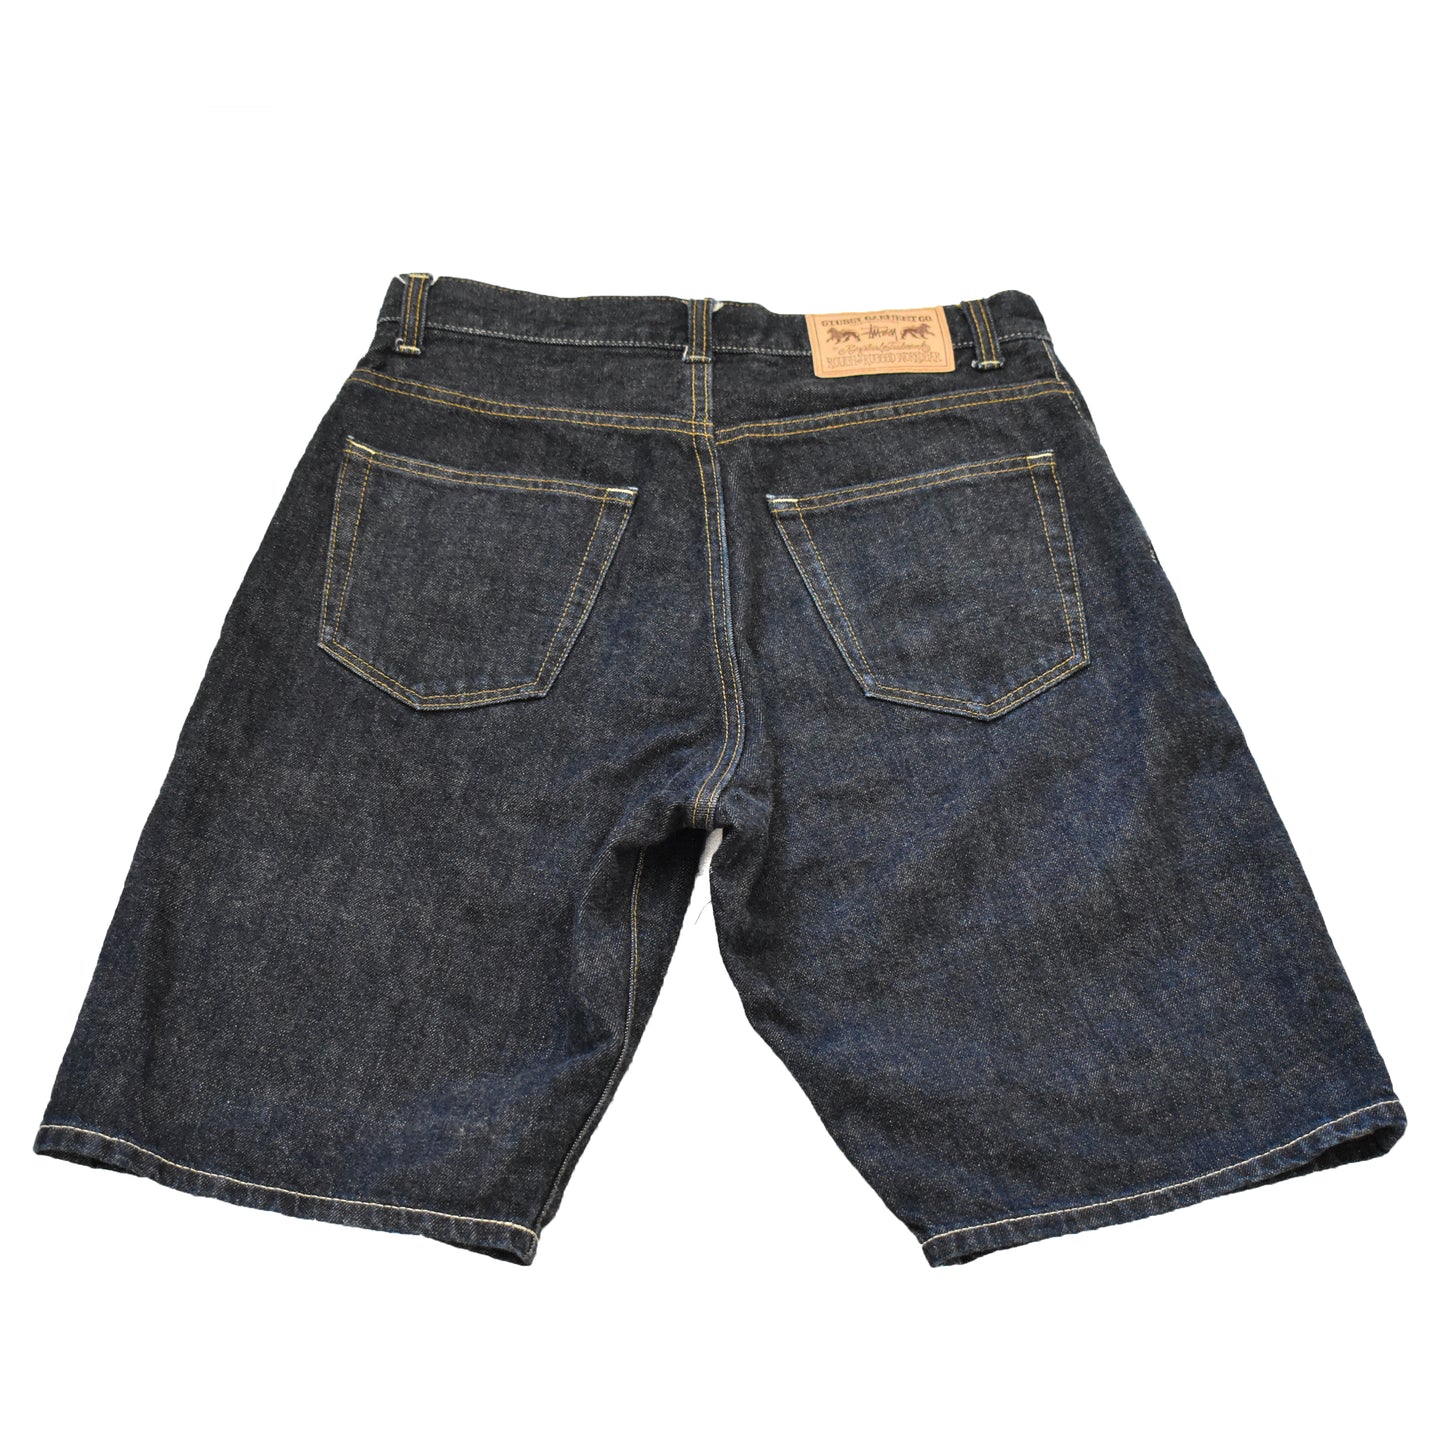 Stussy "Rough and Rugged Denim" Jean Shorts